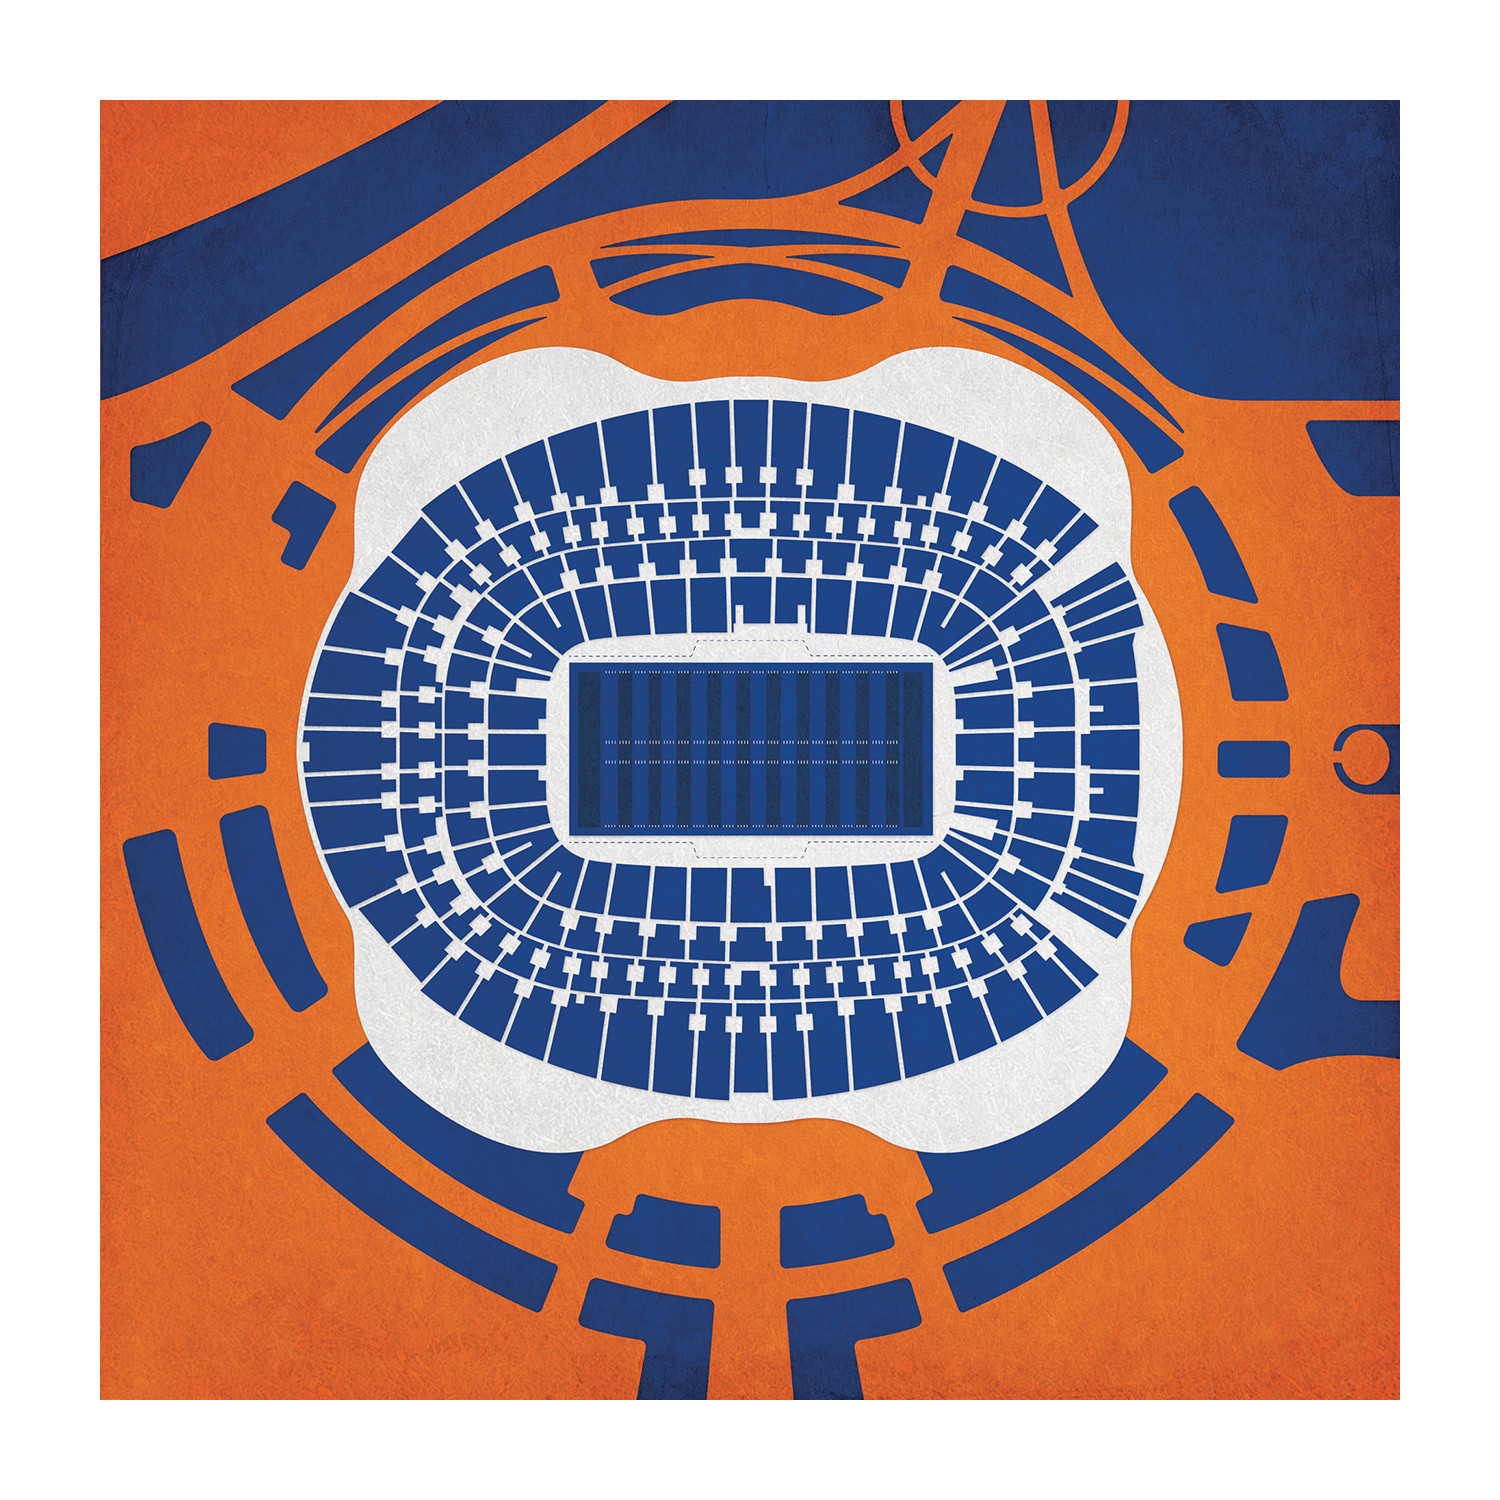 Sports Authority Field Mile High Stadium Seating Chart